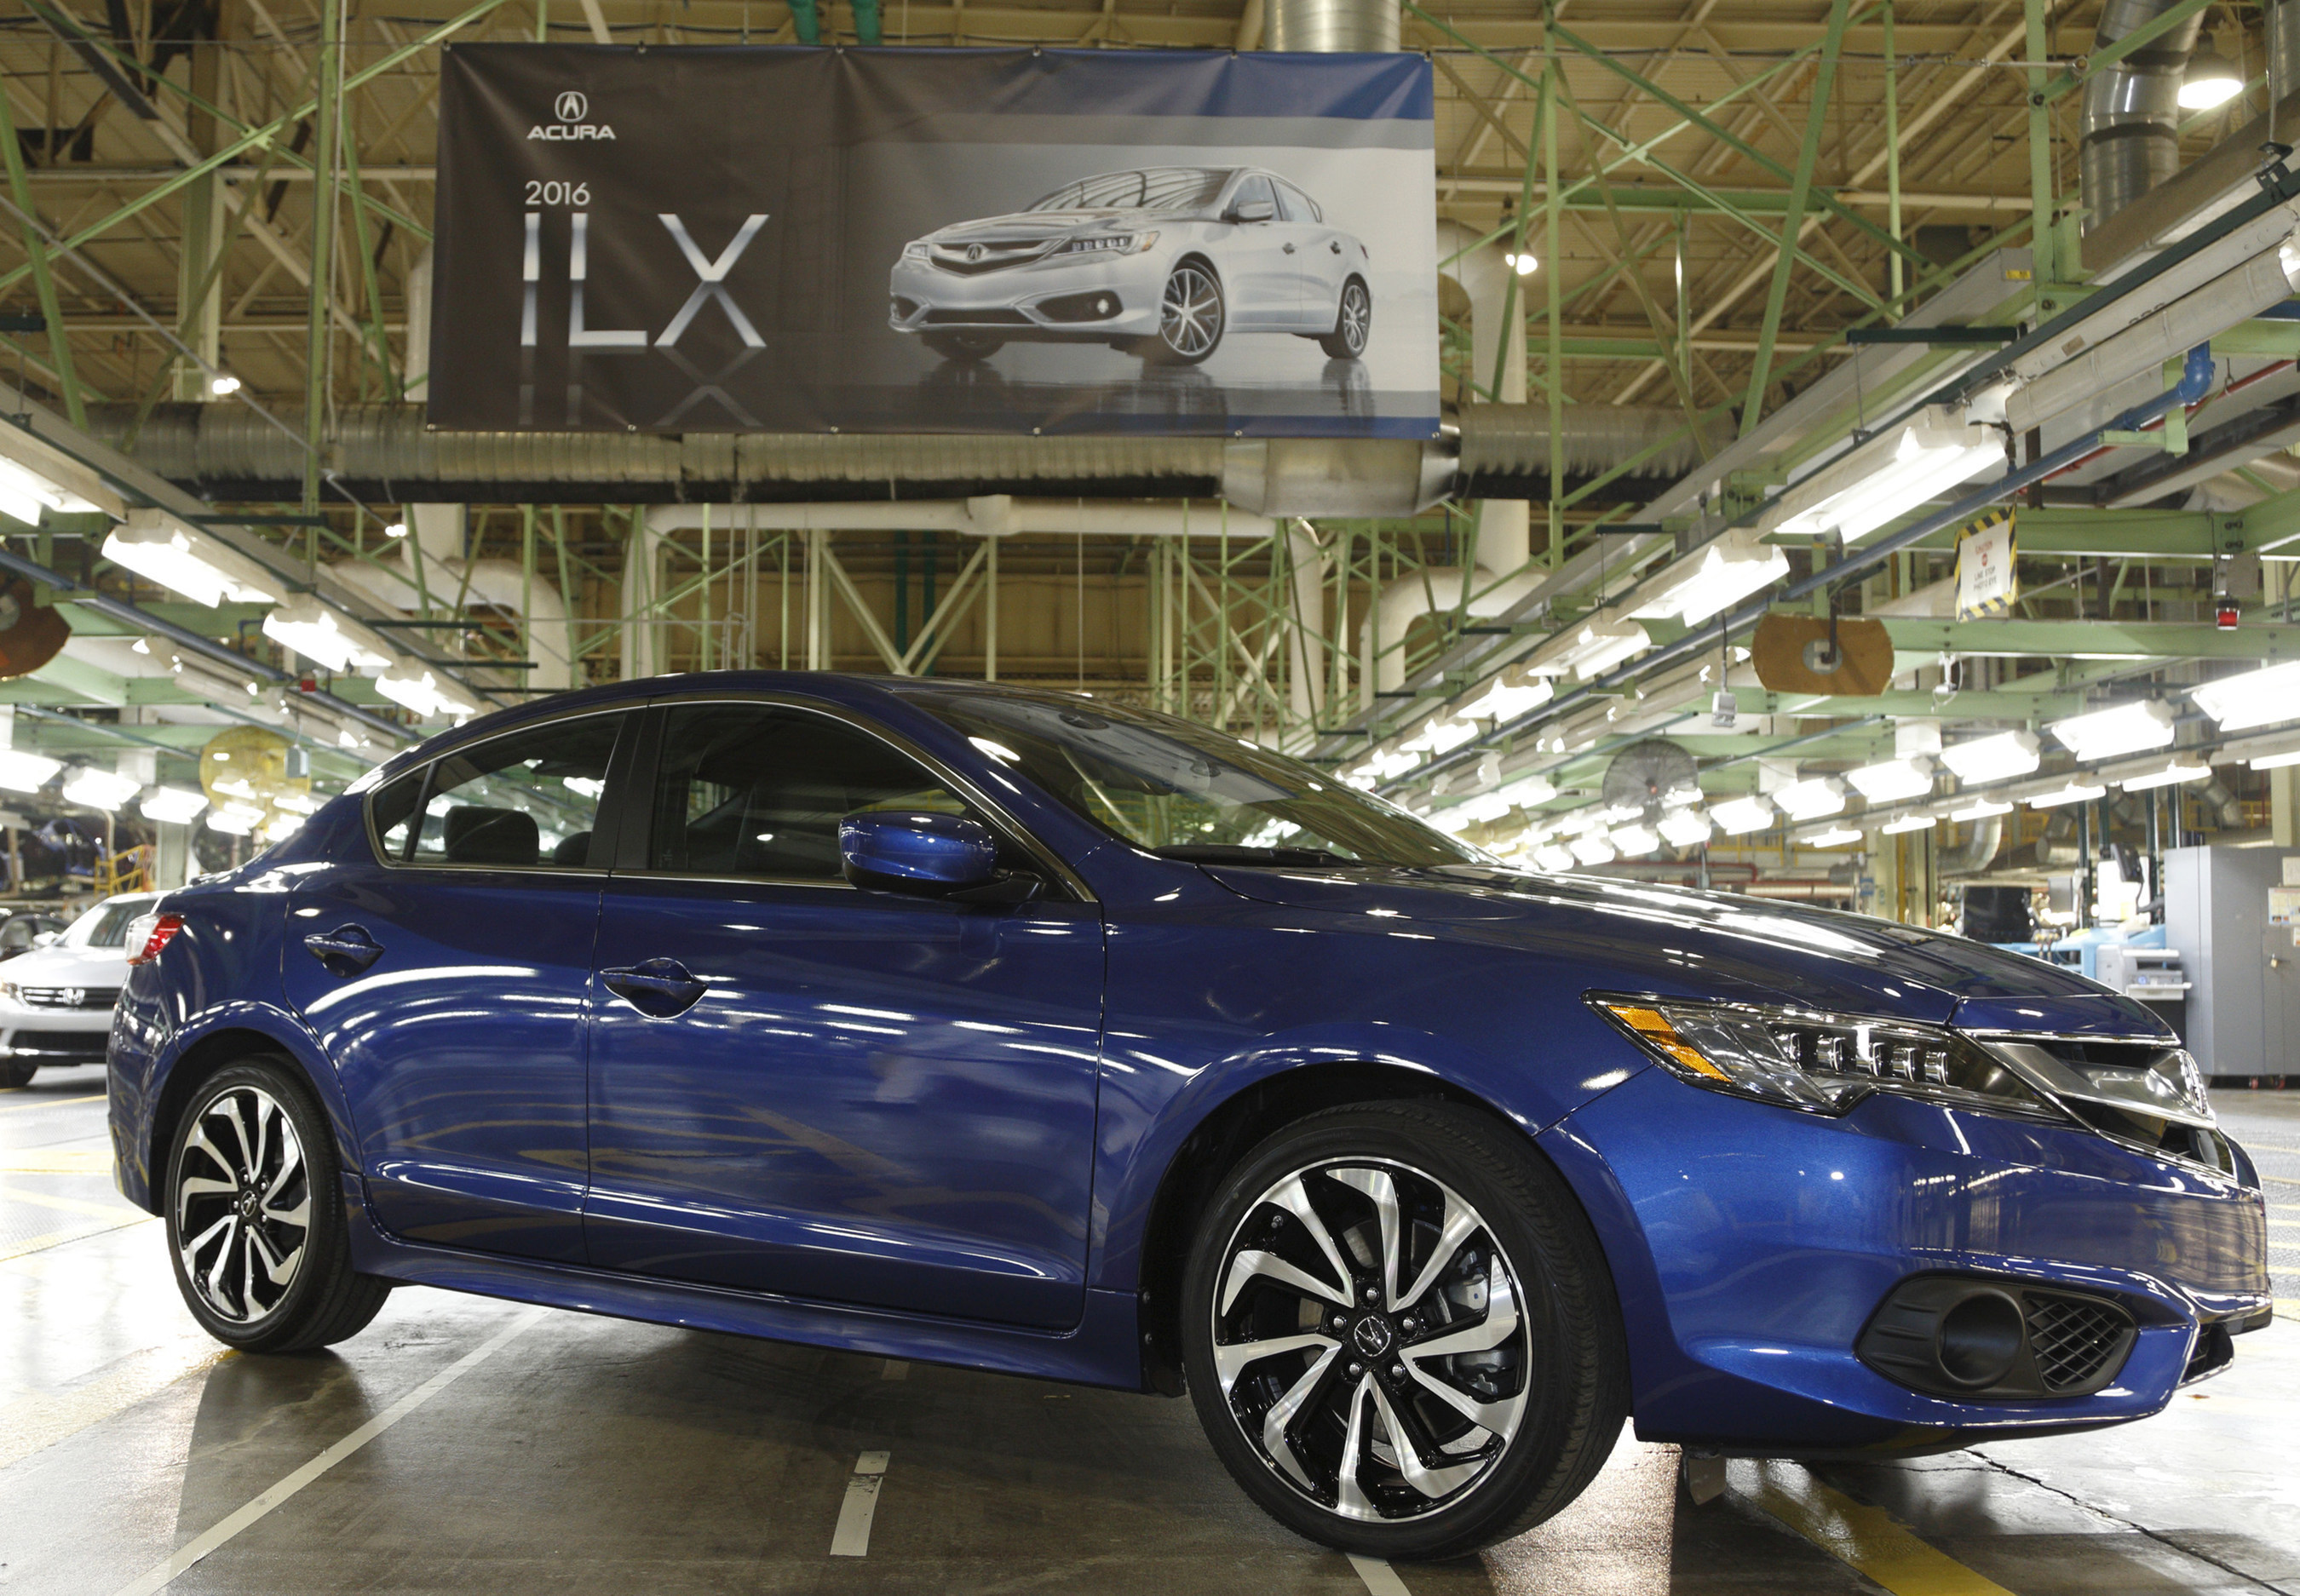 The 2016 Acura ILX begins production in Ohio.